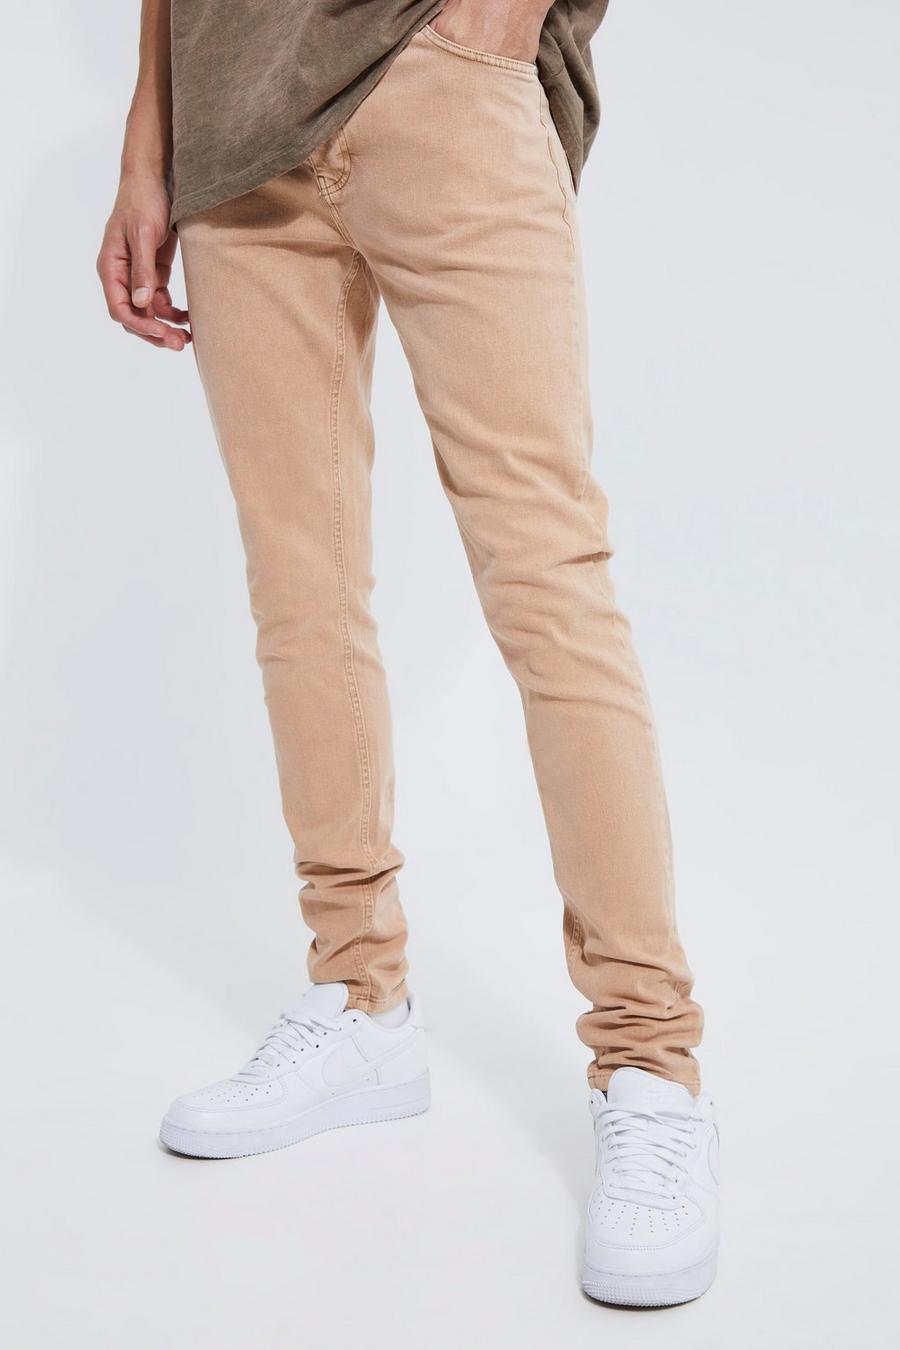 Jeans Tall Skinny Fit Stretch sovratinti in lavaggio color pietra, Stone